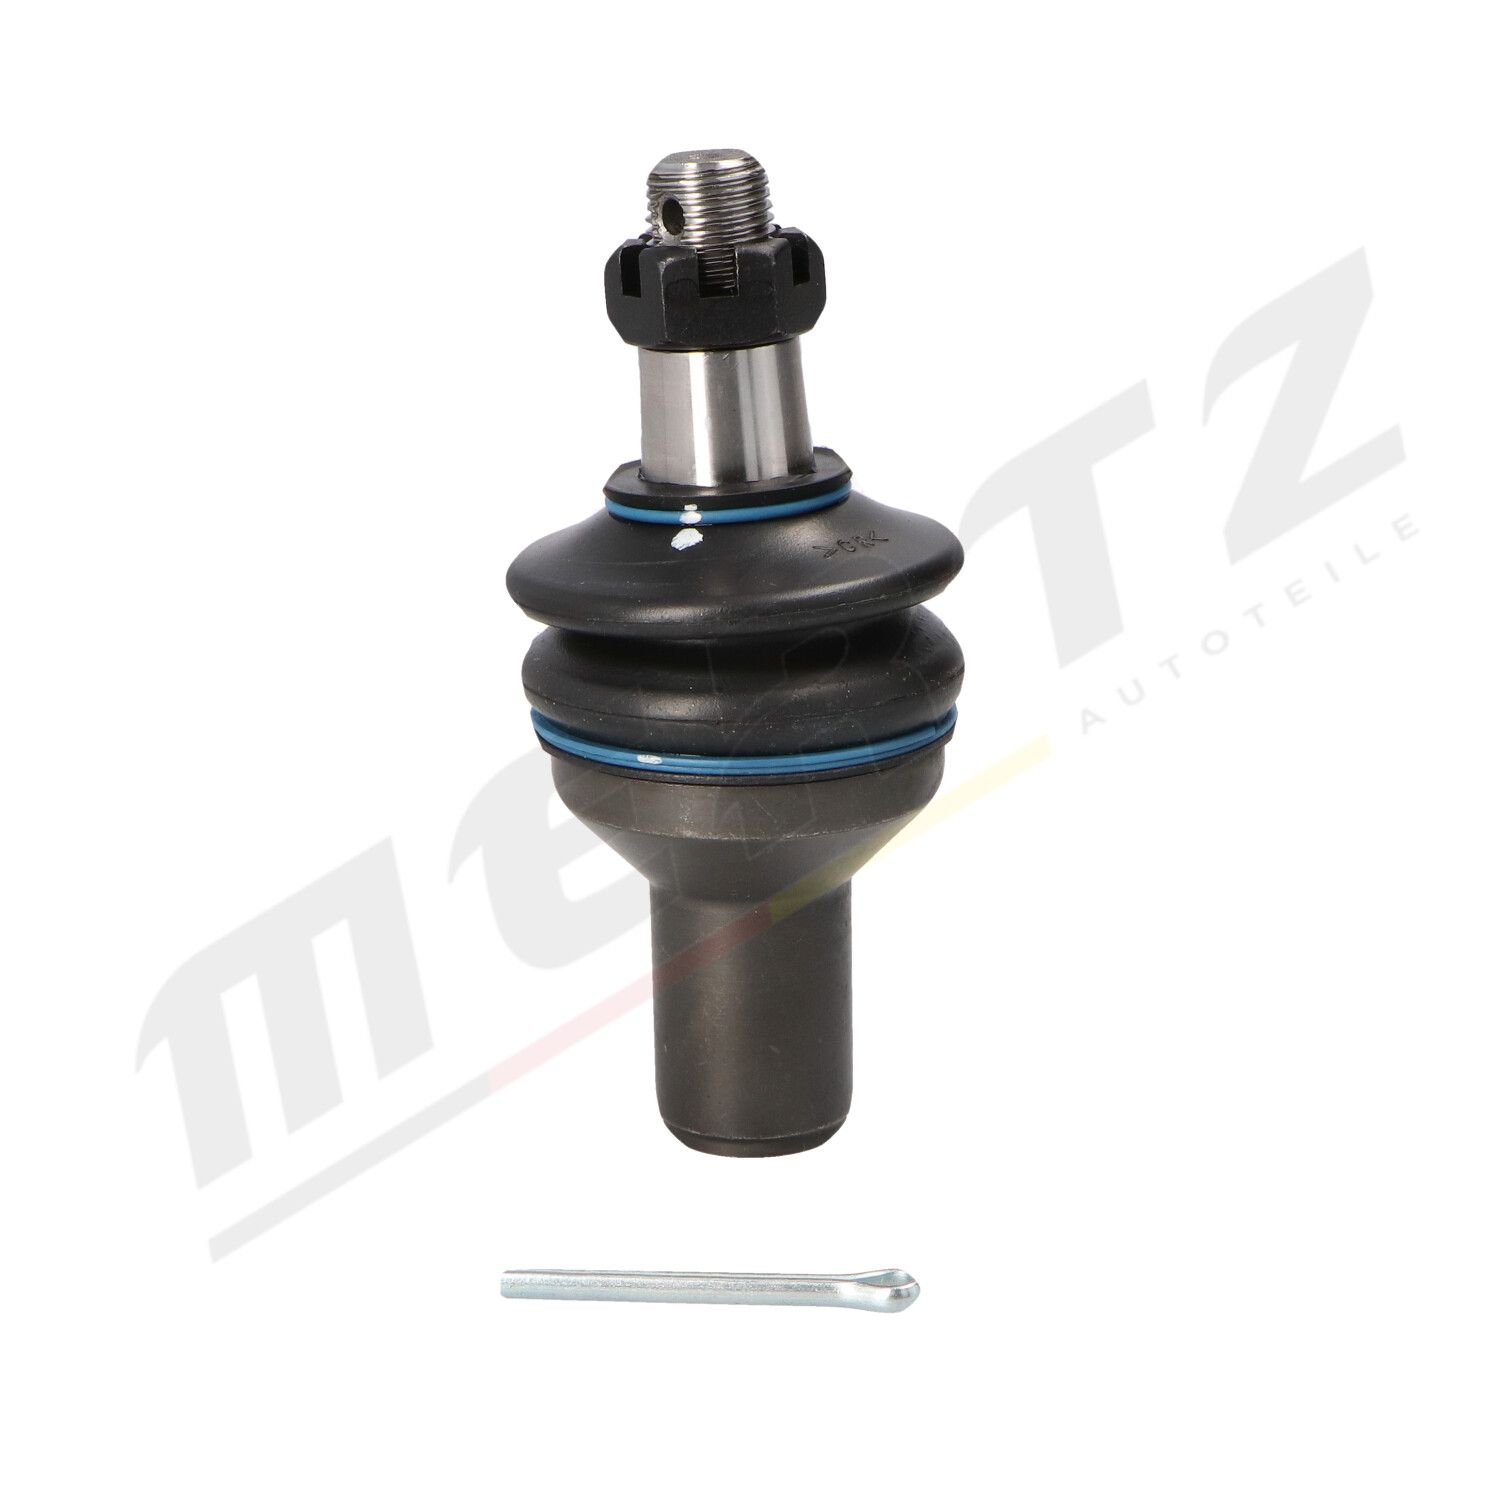 Ball Joint M-S0724